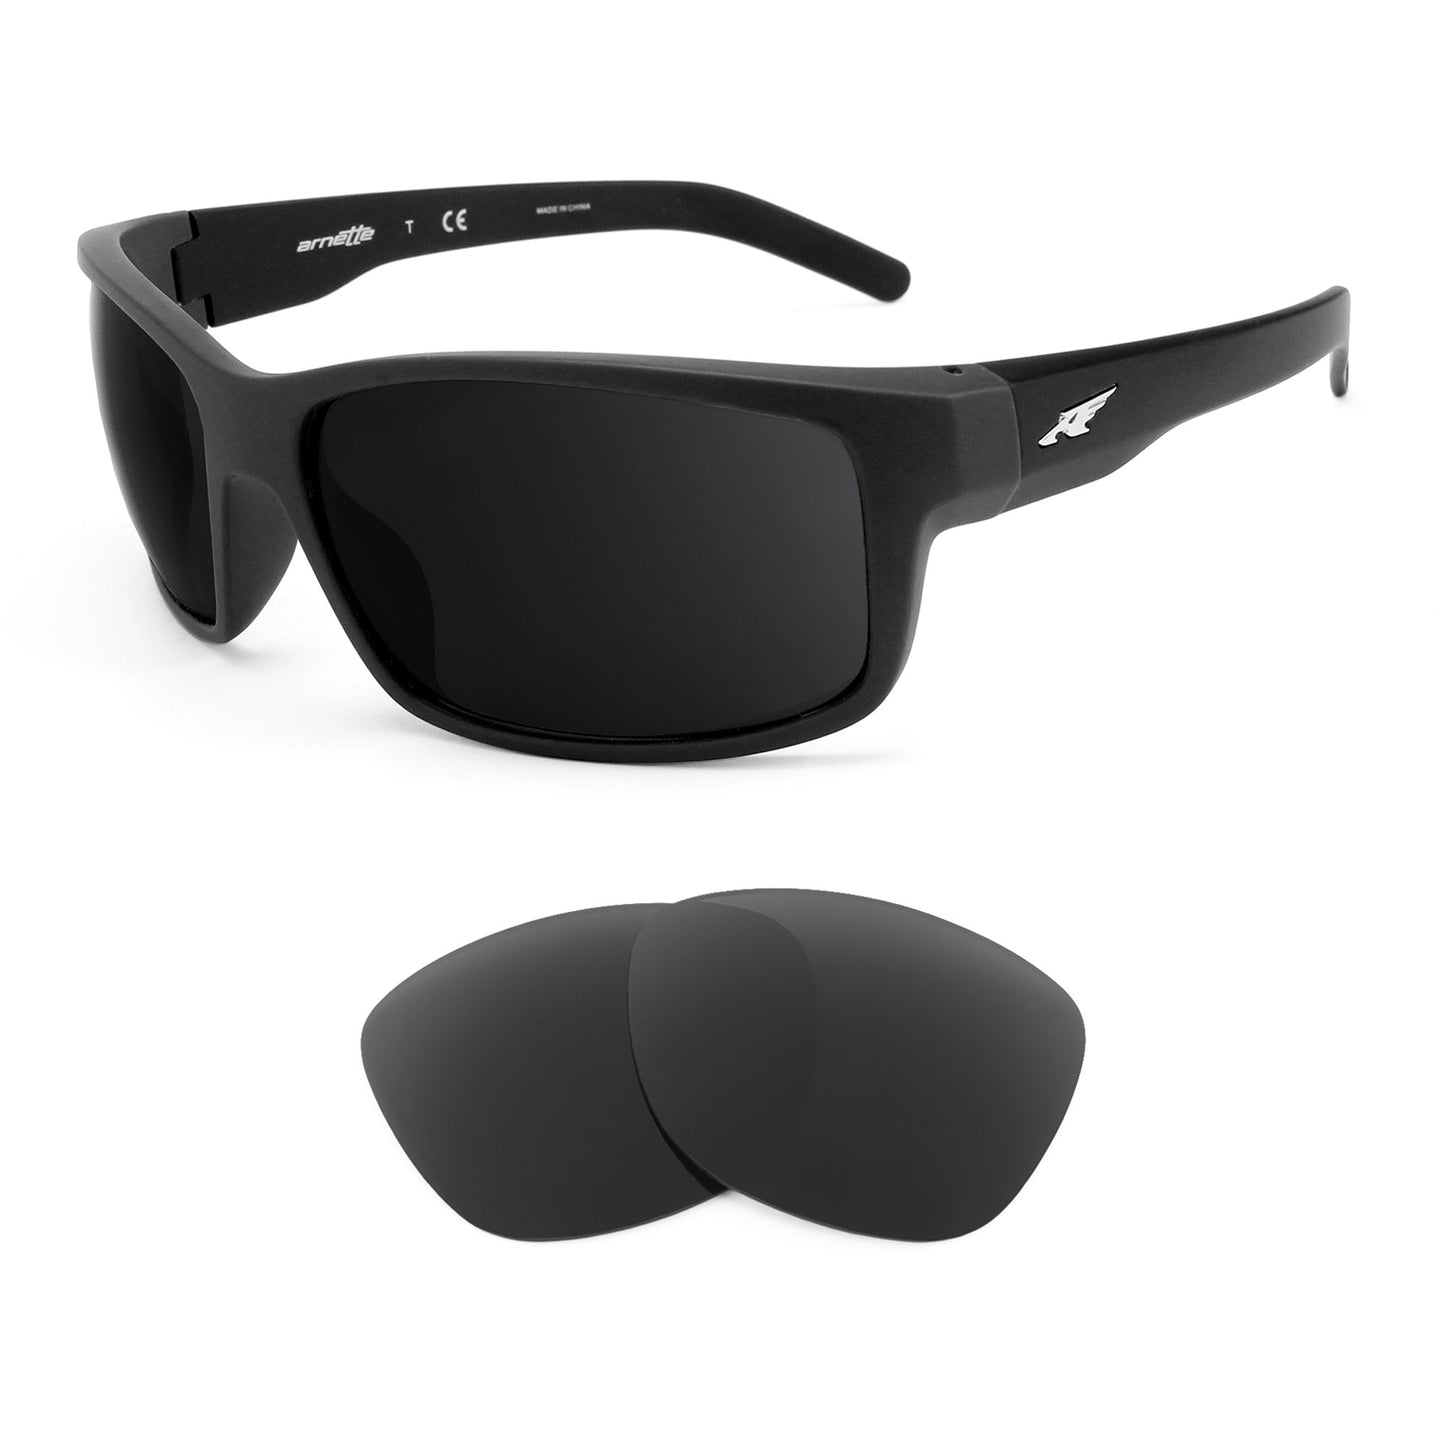 Arnette Fastball AN4202 sunglasses with replacement lenses